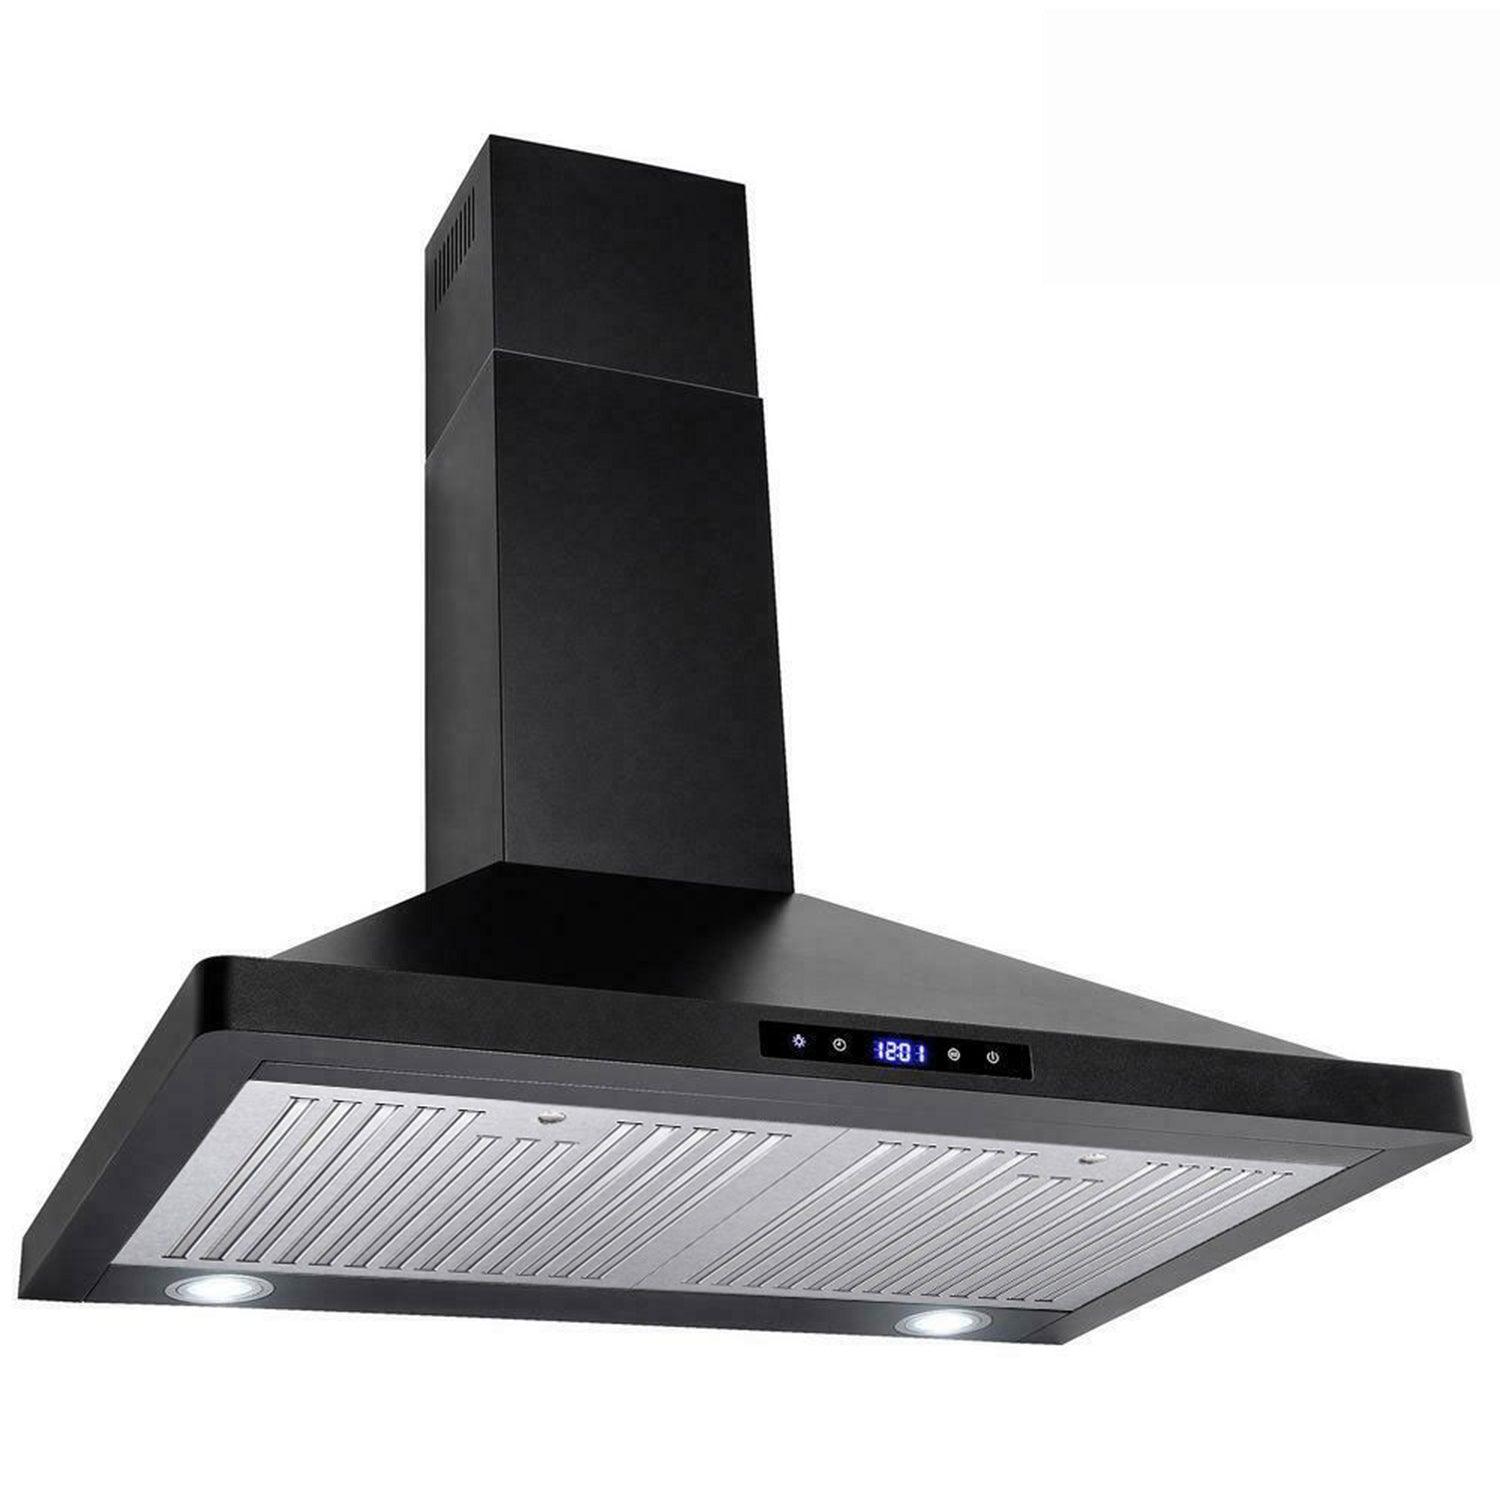 36 in. Black 450 CFM Ducted Wall Mount Range Hood Stainless Steel Kitchen Vent Hood